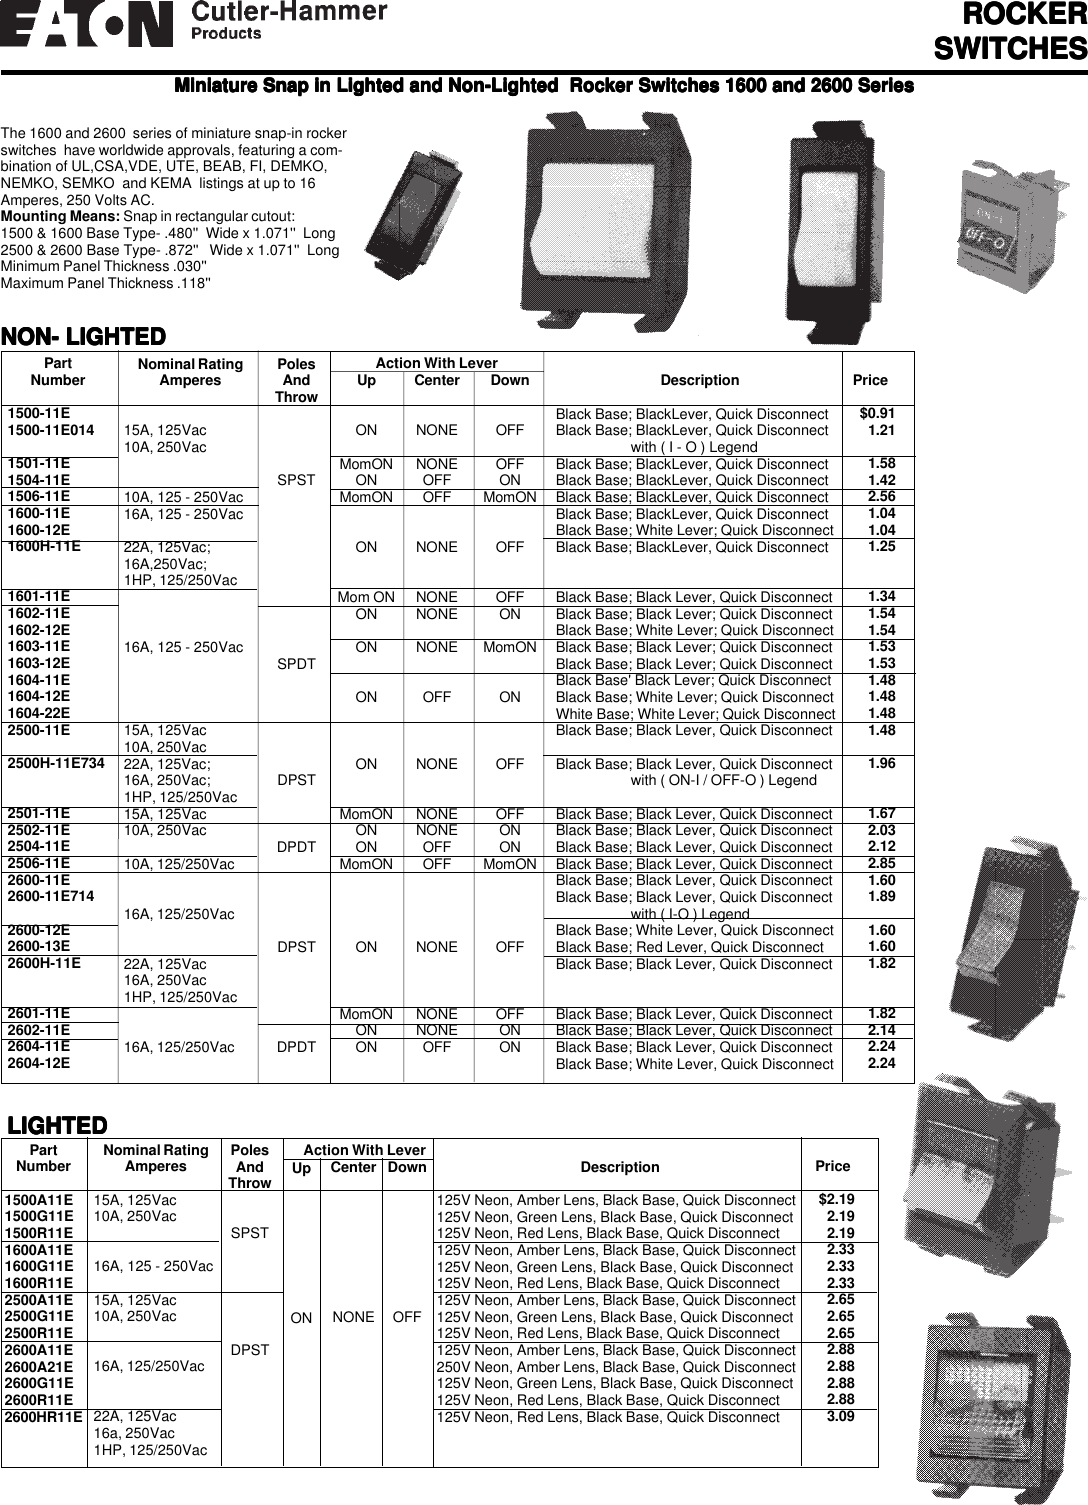 Page 5 of 8 - Eaton Cutler-Hammer  1000418720-Catalog